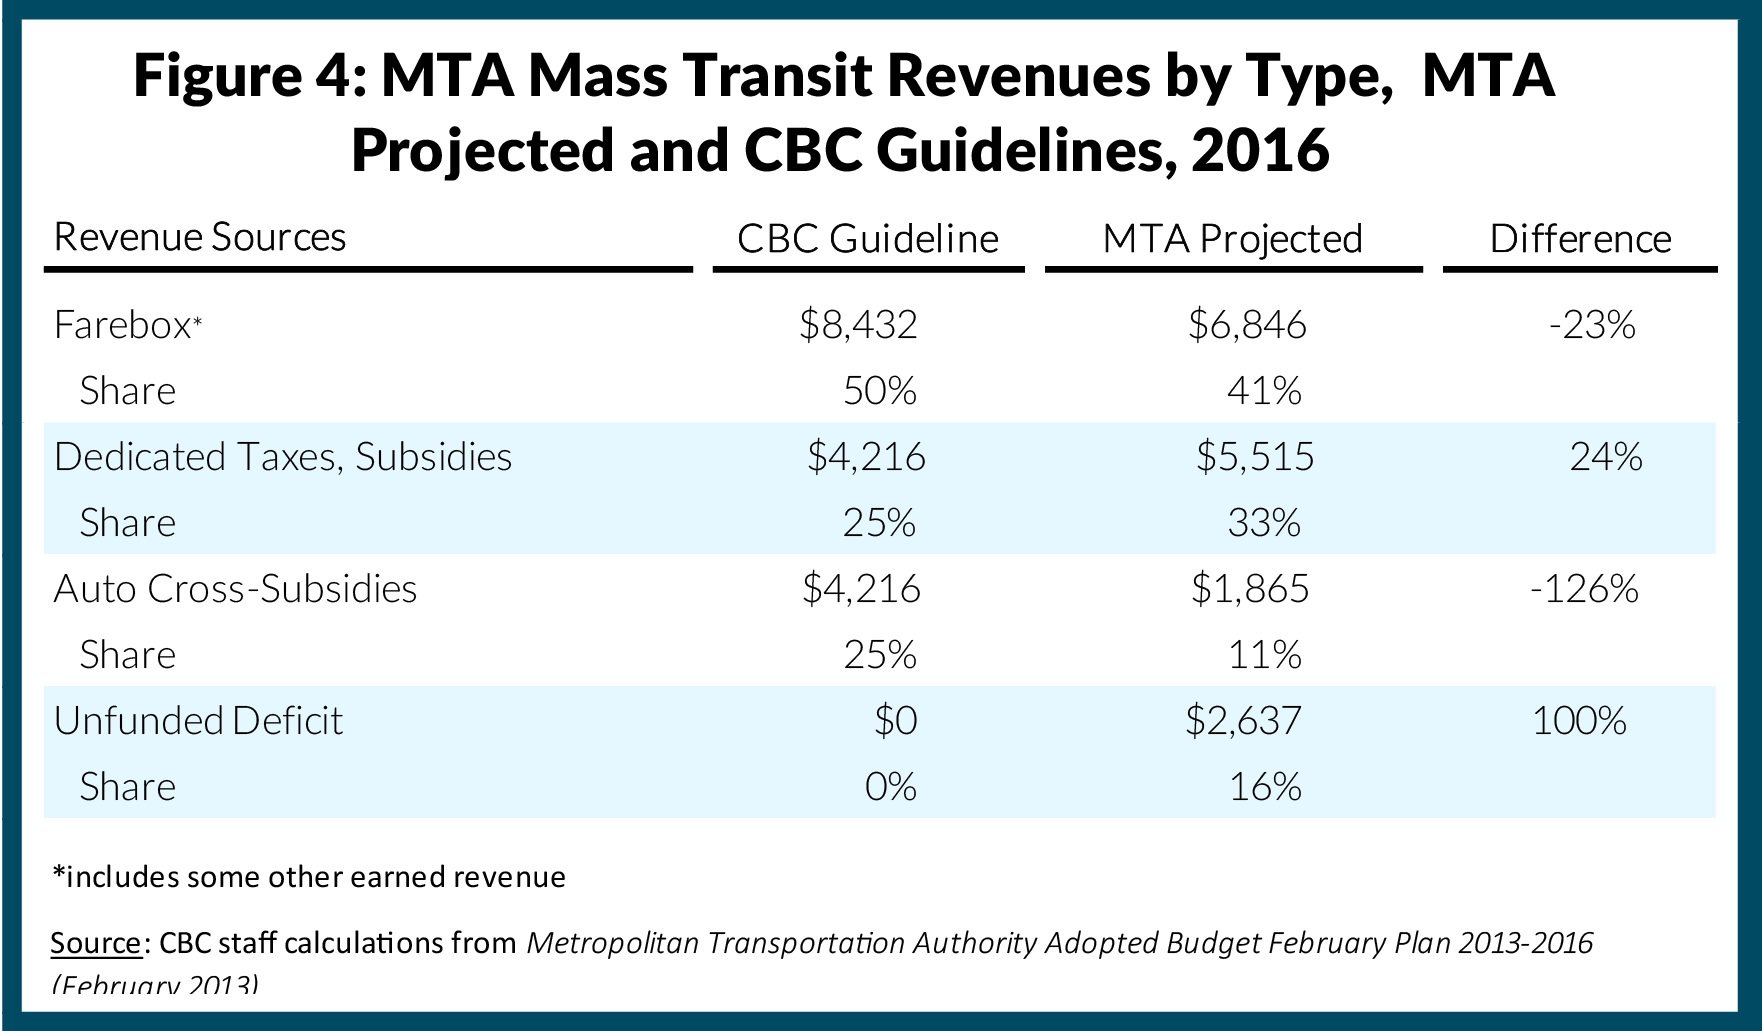 MTA Mass Transit Revenues by Type, MTA Projected and CBC Guidelines